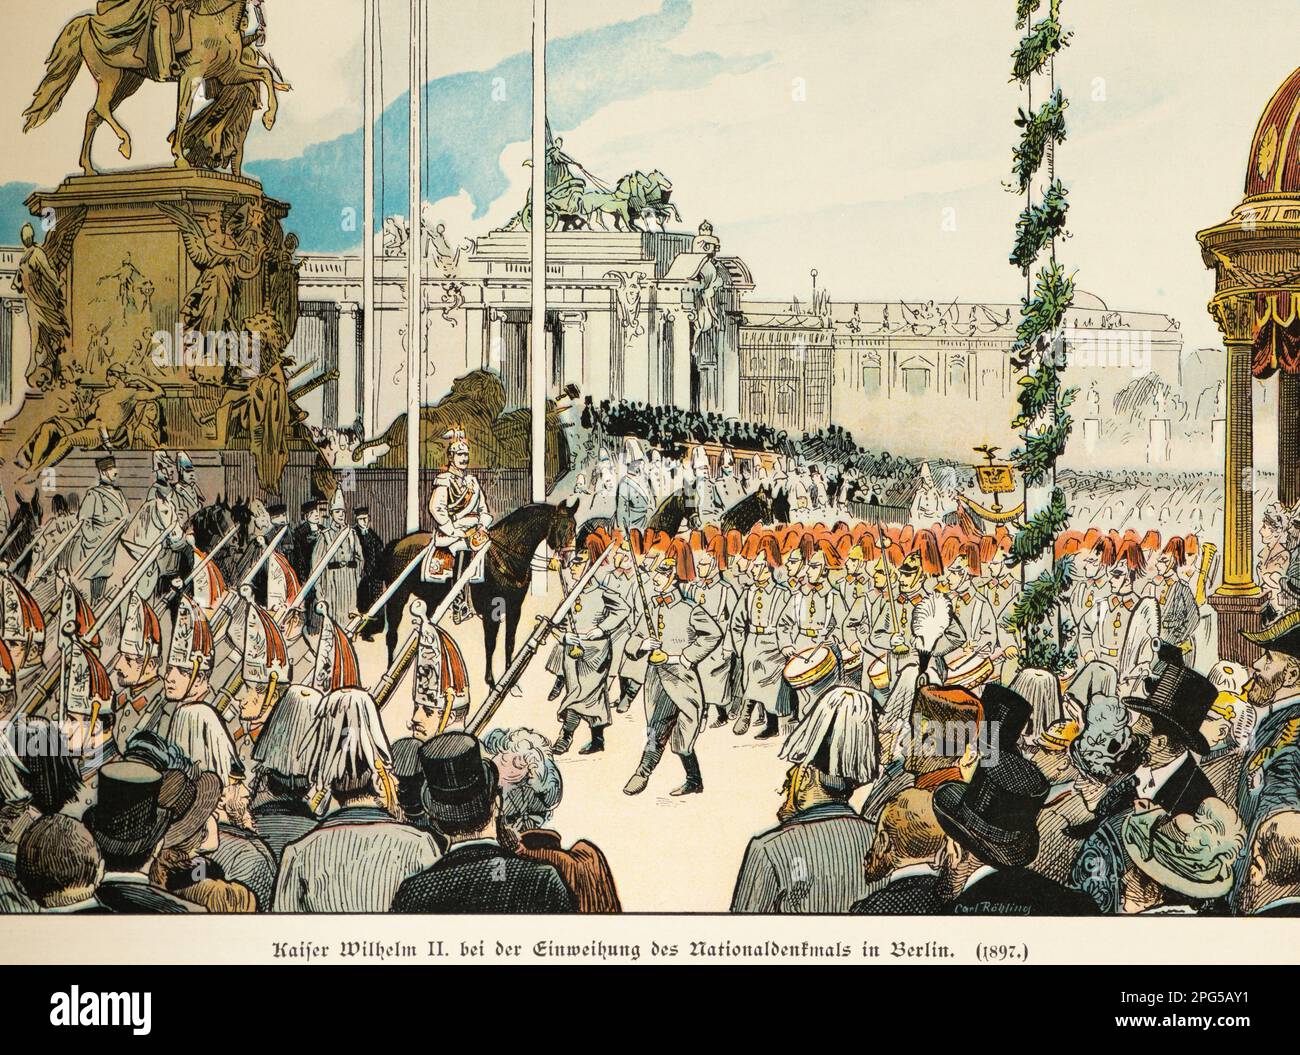 Emperor William I inaugurating the National Monument in Berlin 1897, history of the Hohenzollern, German Reich, historical illustration 1899 Stock Photo